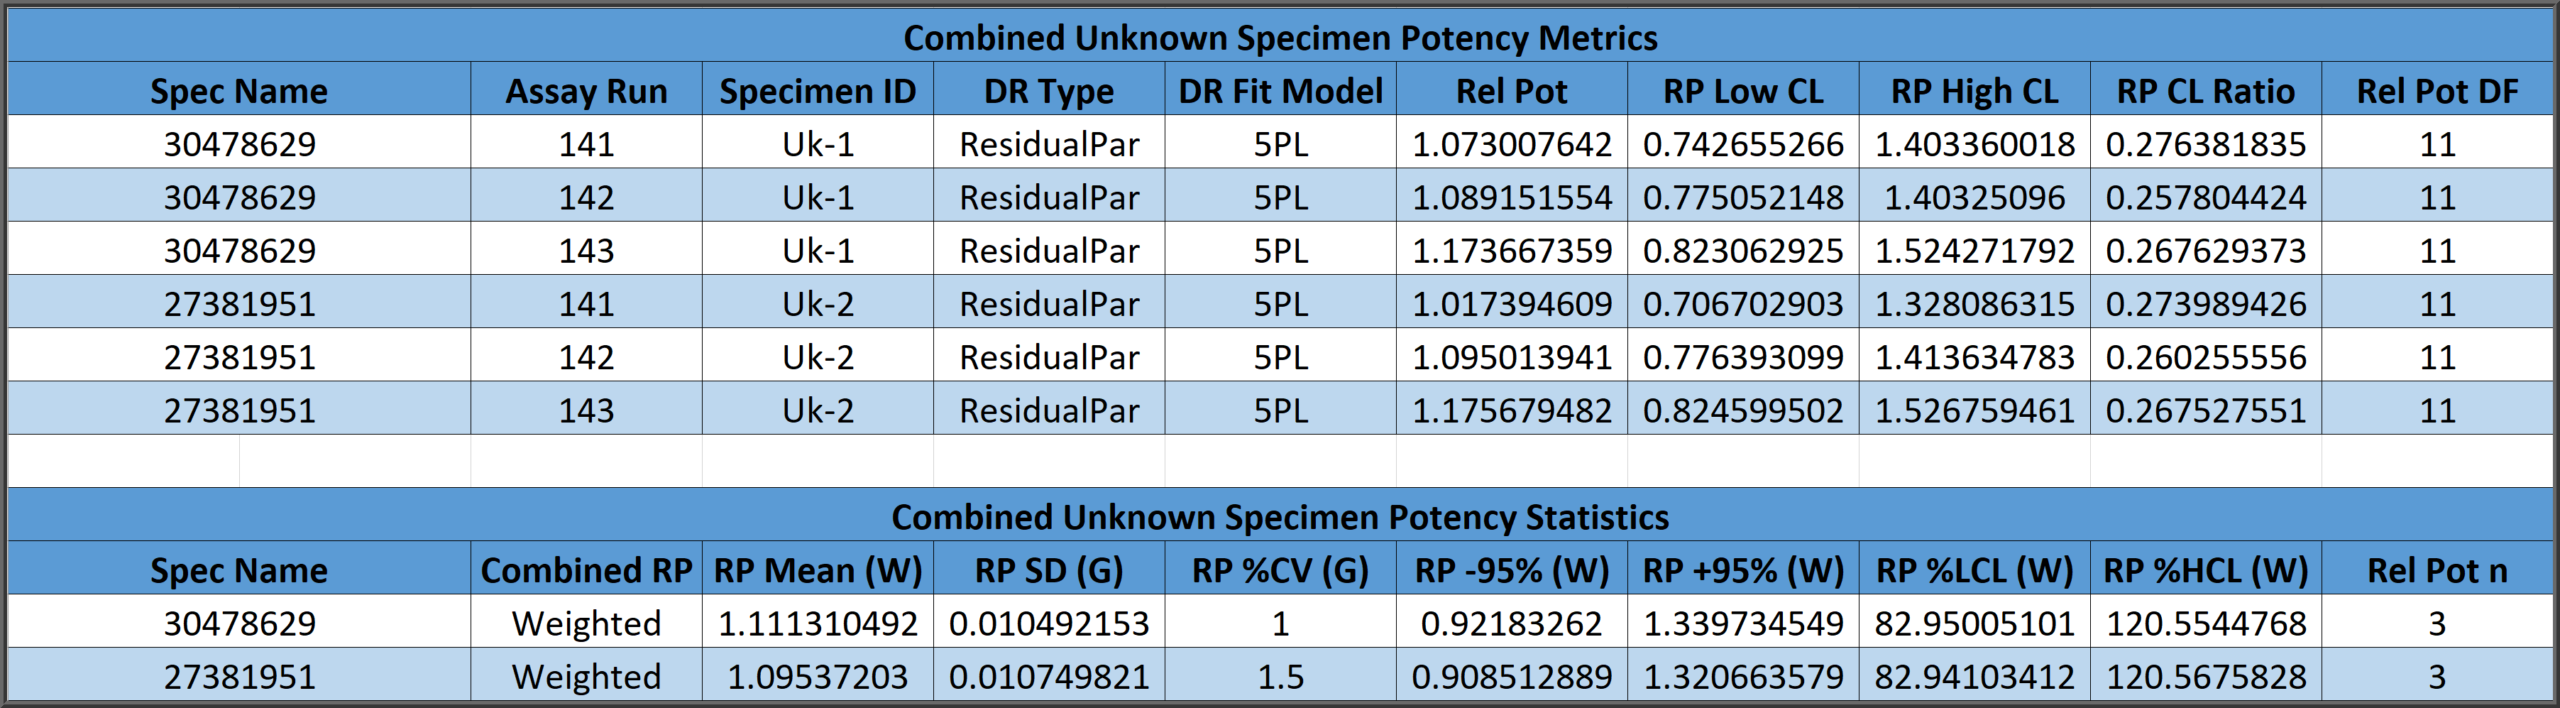 Combined Relative Potency Results and Statistics